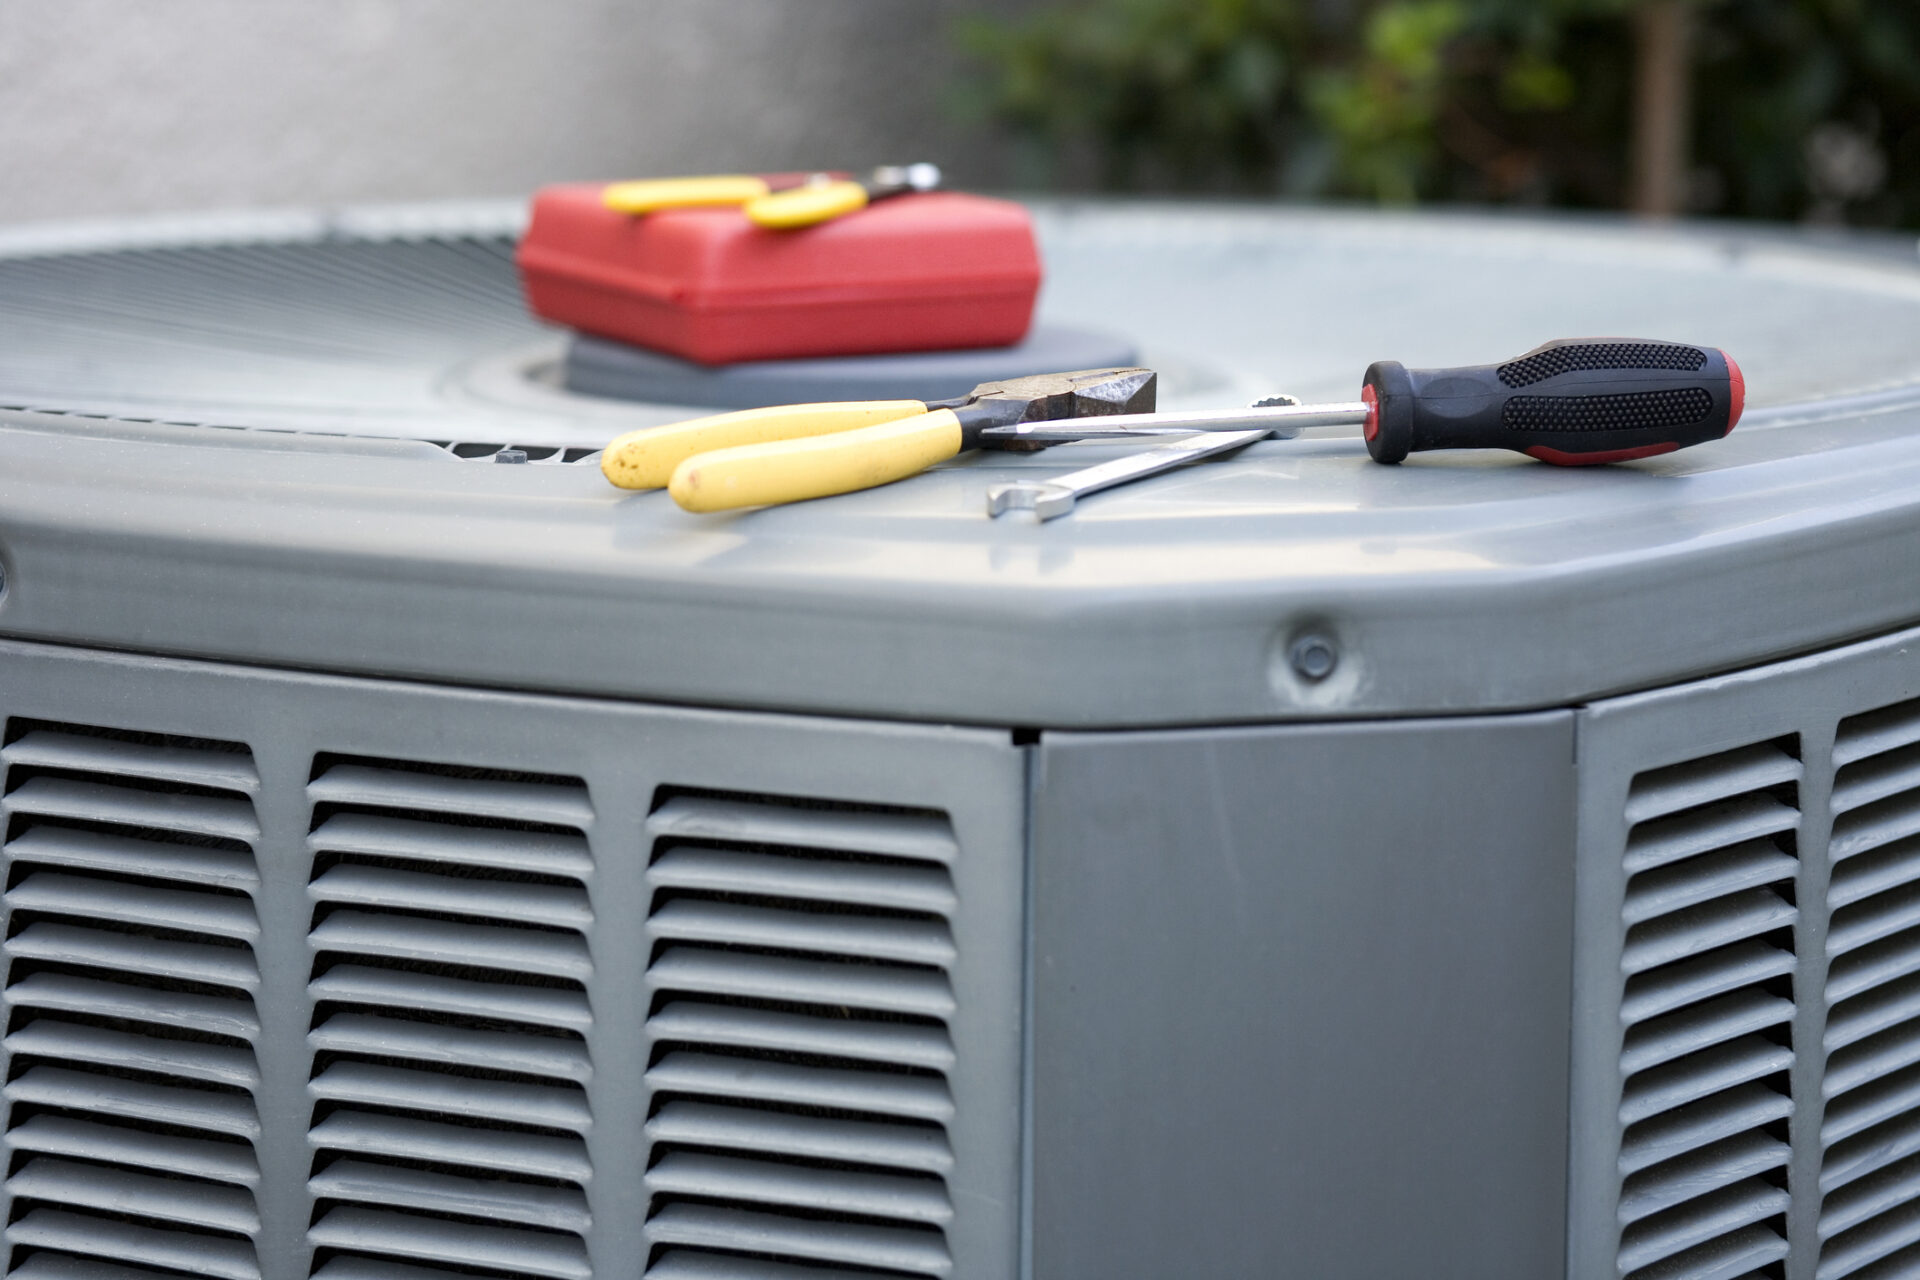 An air conditioning unit outdoors with tools on top, including pliers and a screwdriver, suggesting maintenance work, with a red toolbox nearby.